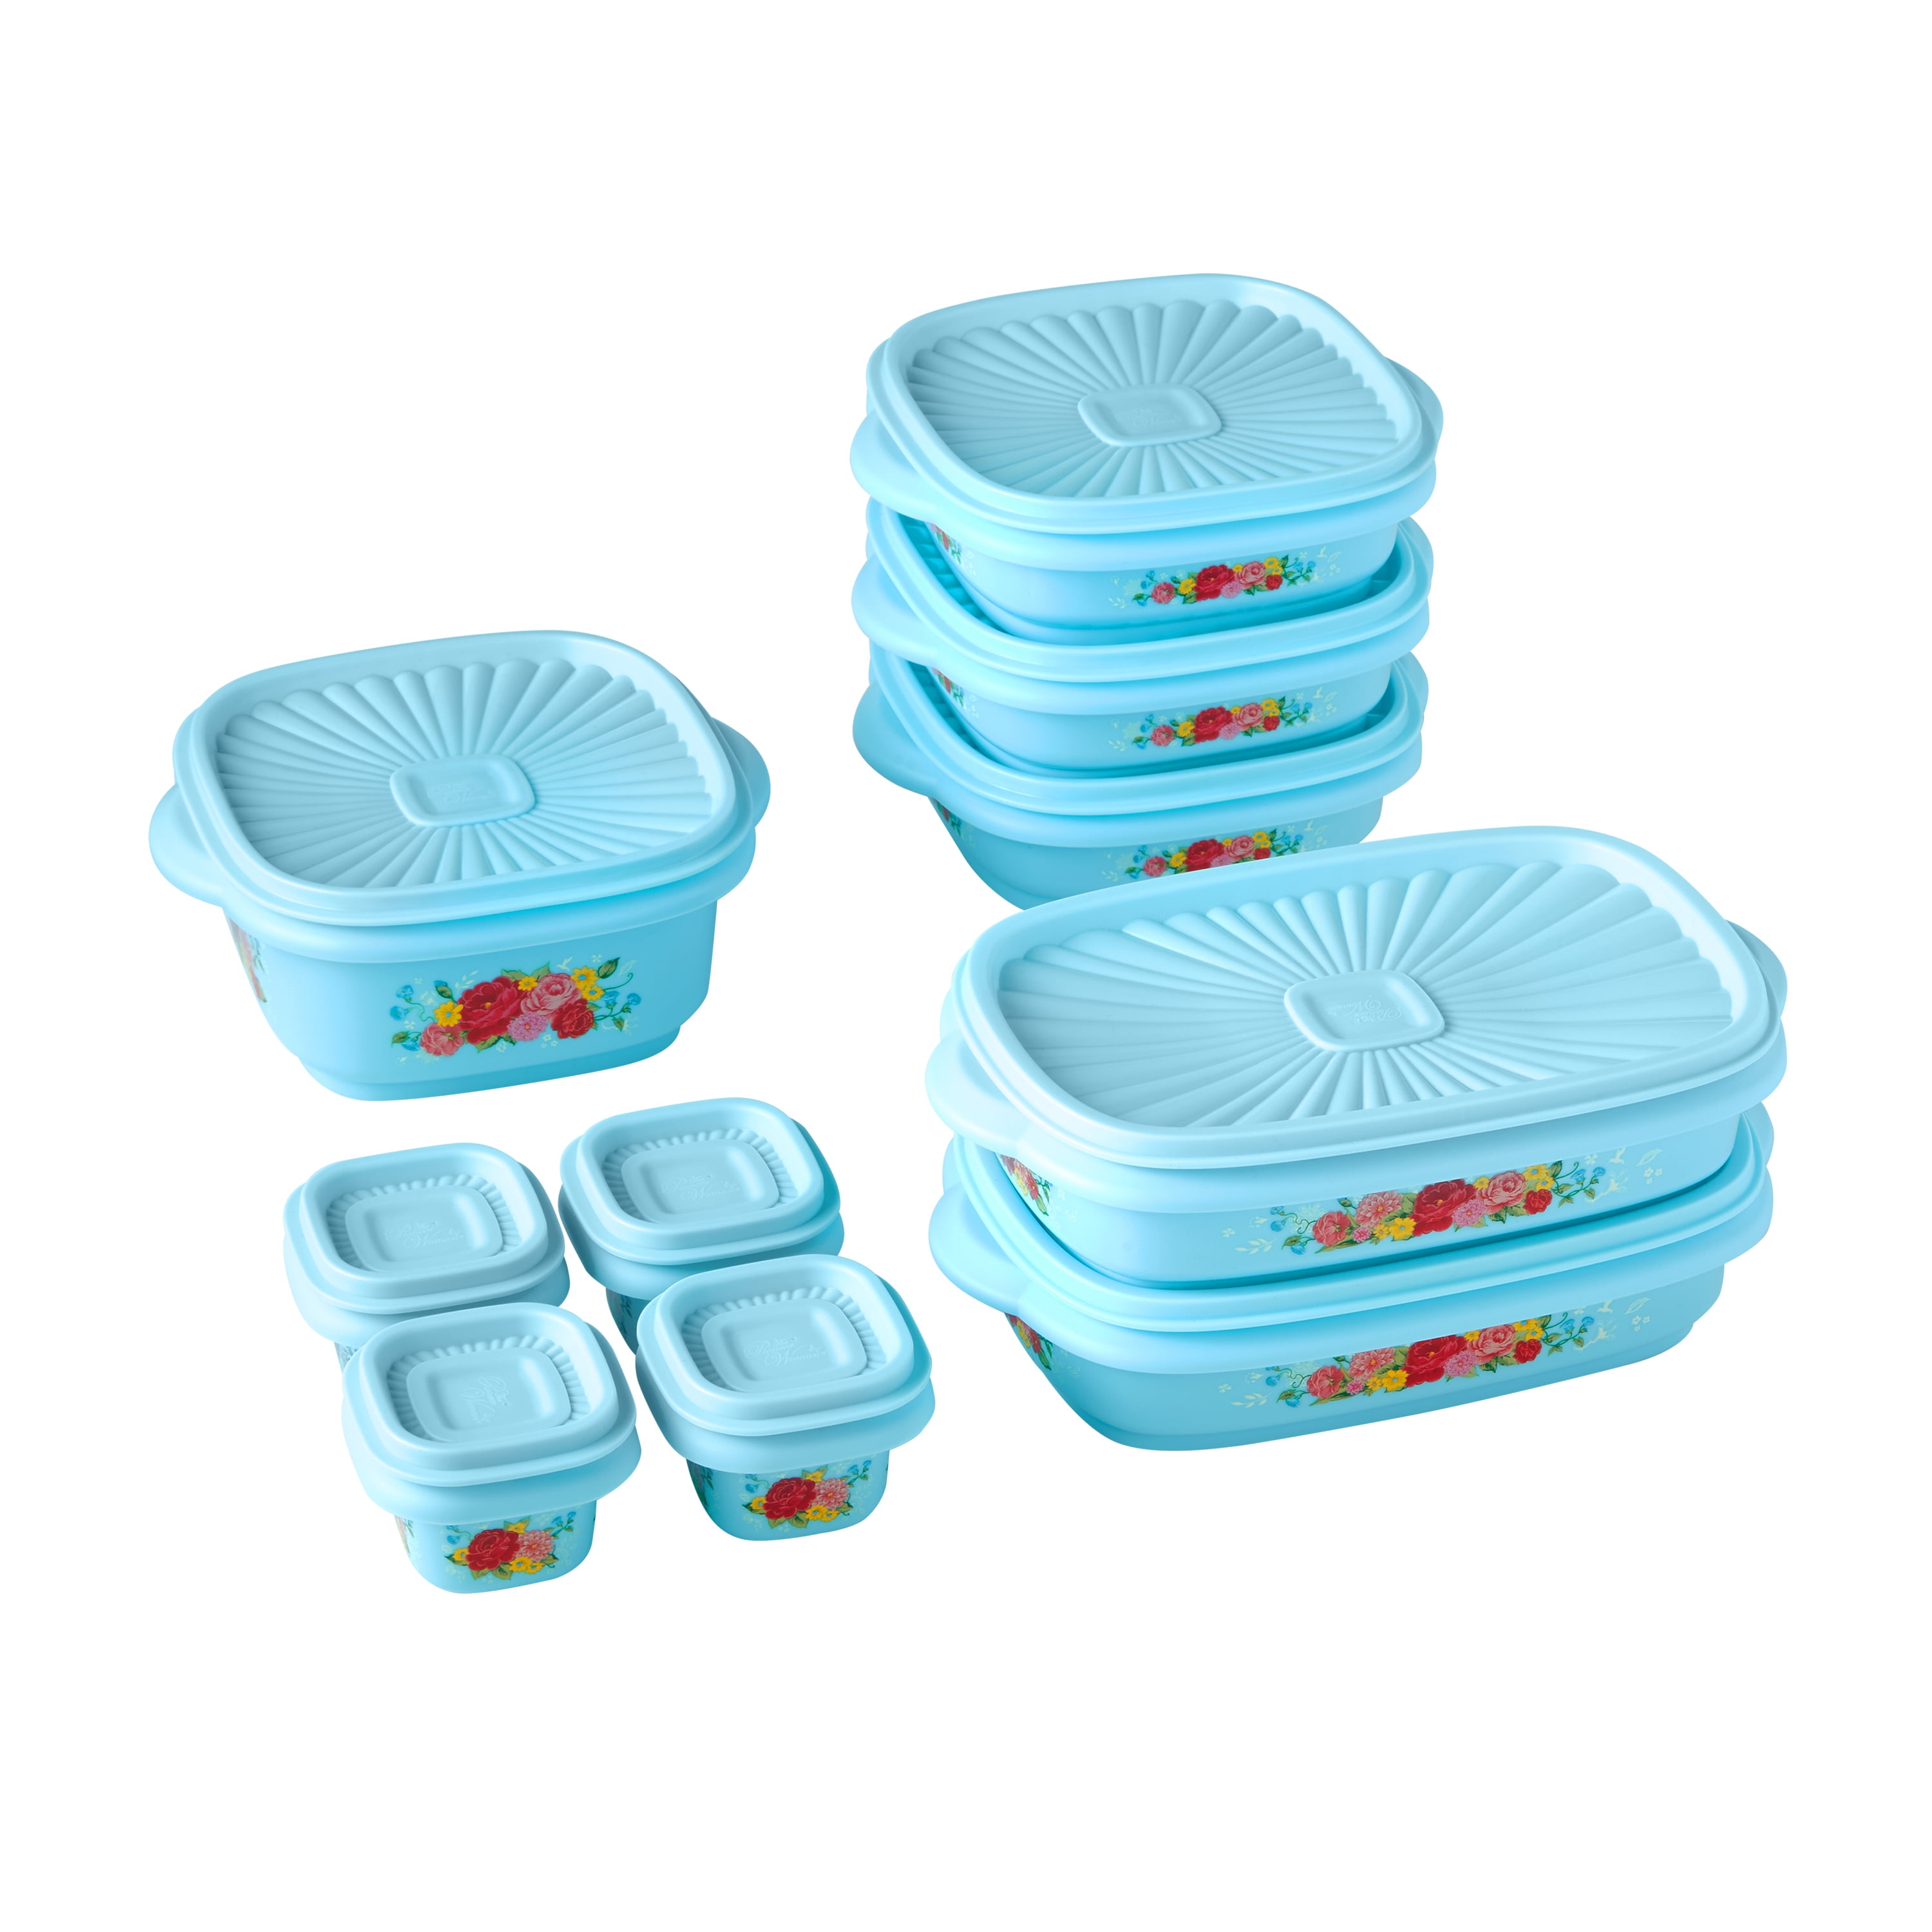 Signature Housewares Translucent Microwavable Storage Bowls with